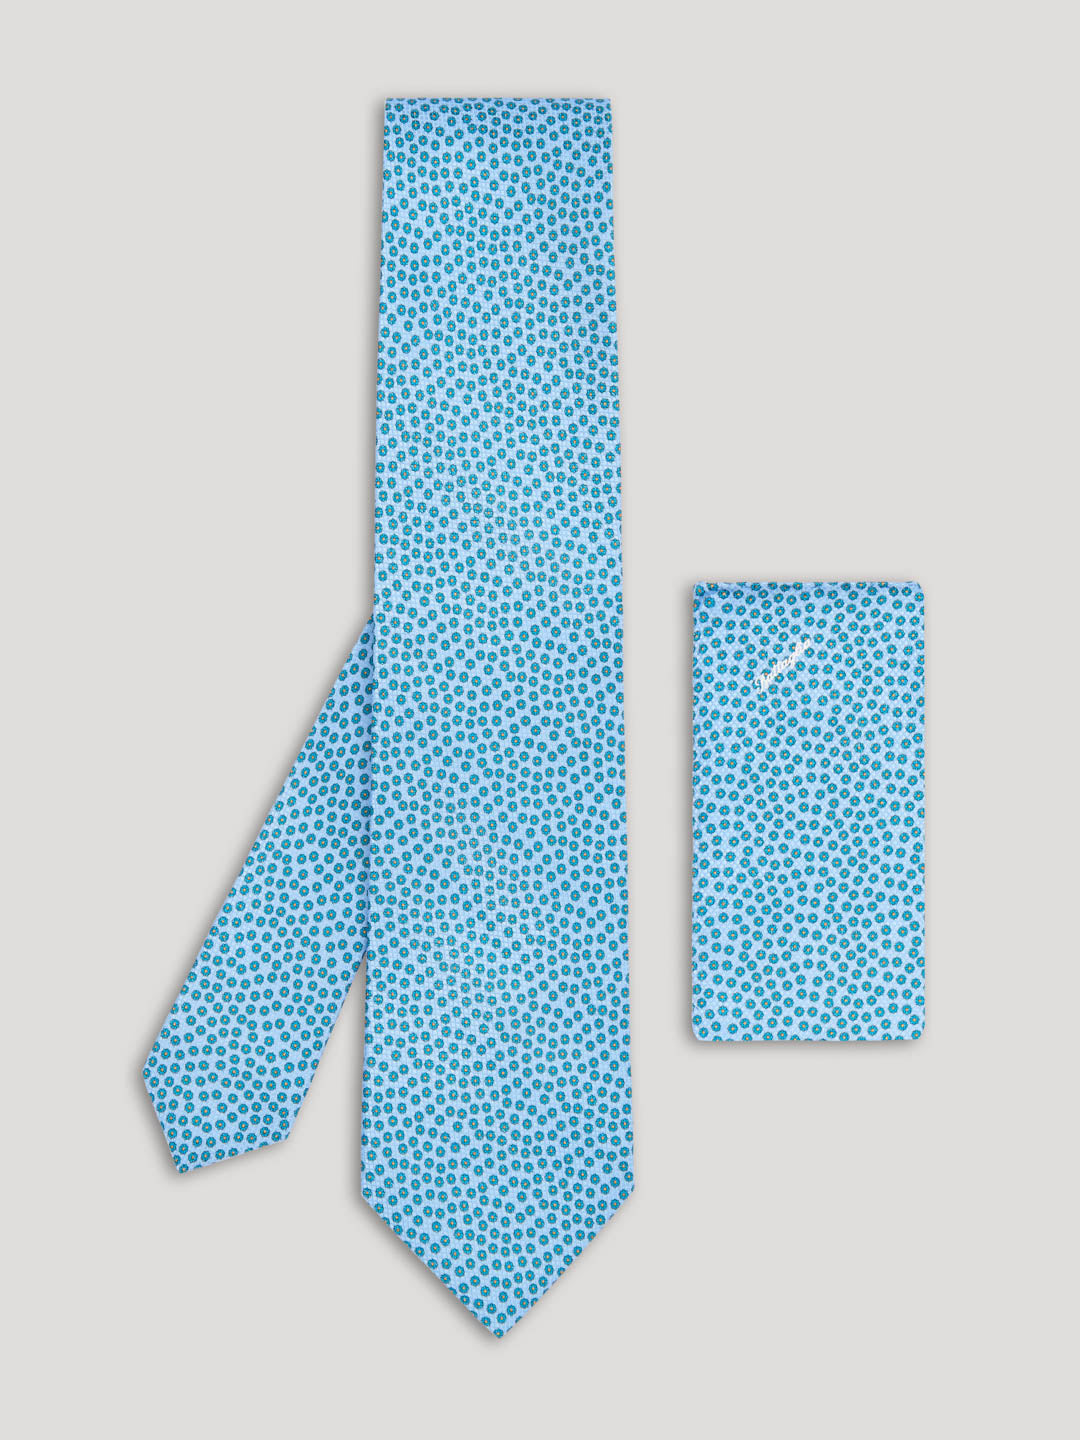 Light blue floral pattern tie with matching handkerchief.